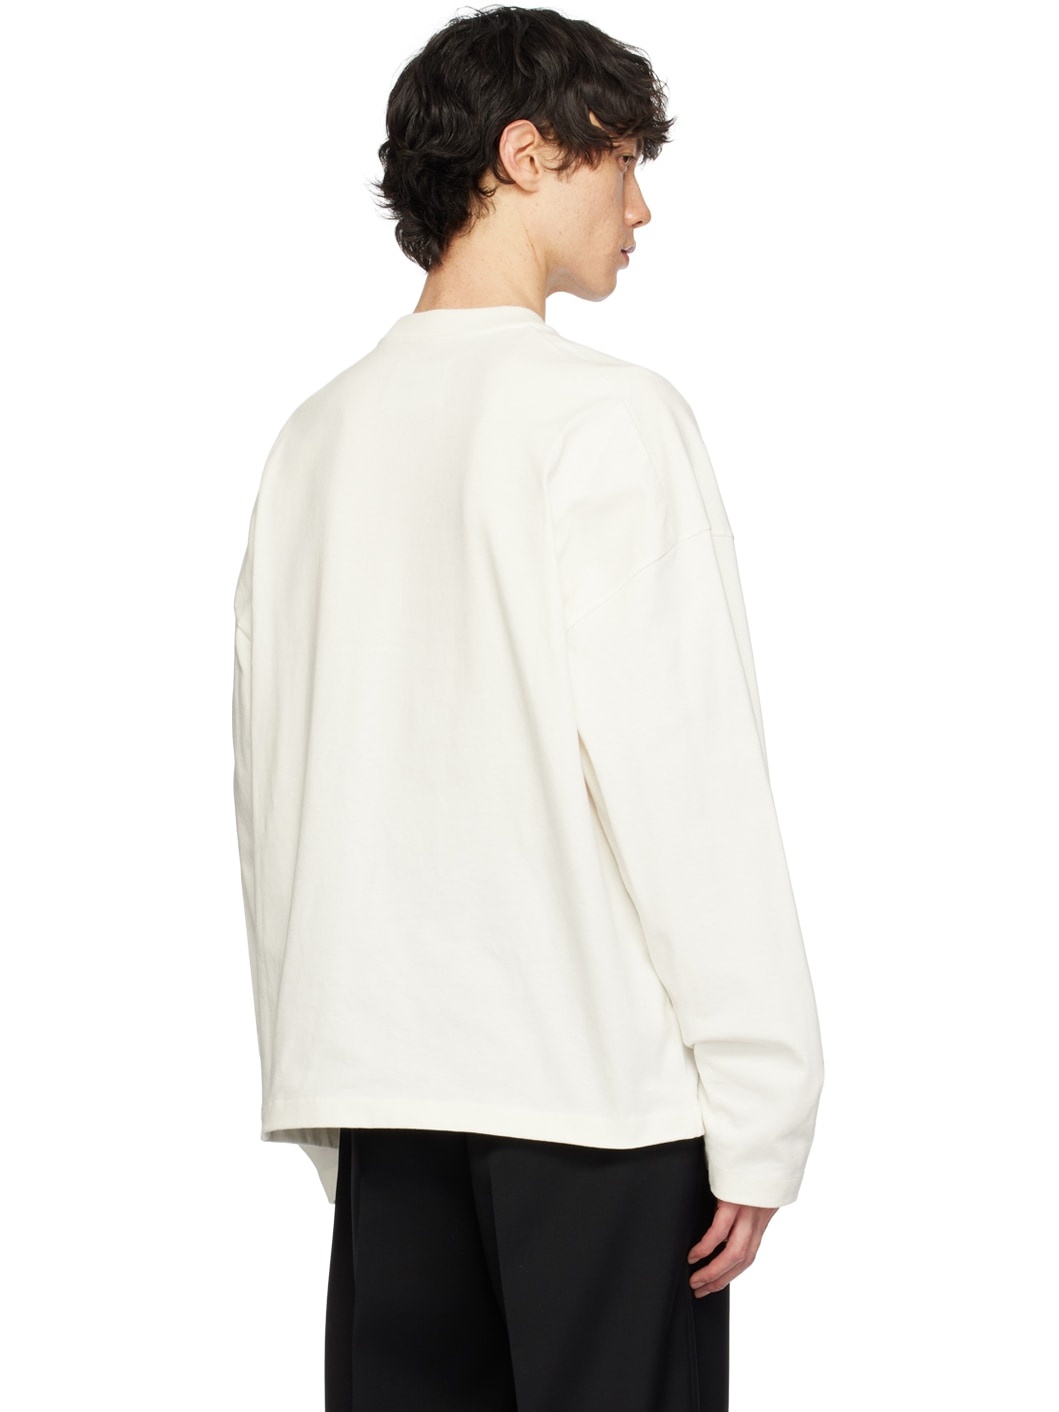 Off-White Printed Long Sleeve T-Shirt - 3